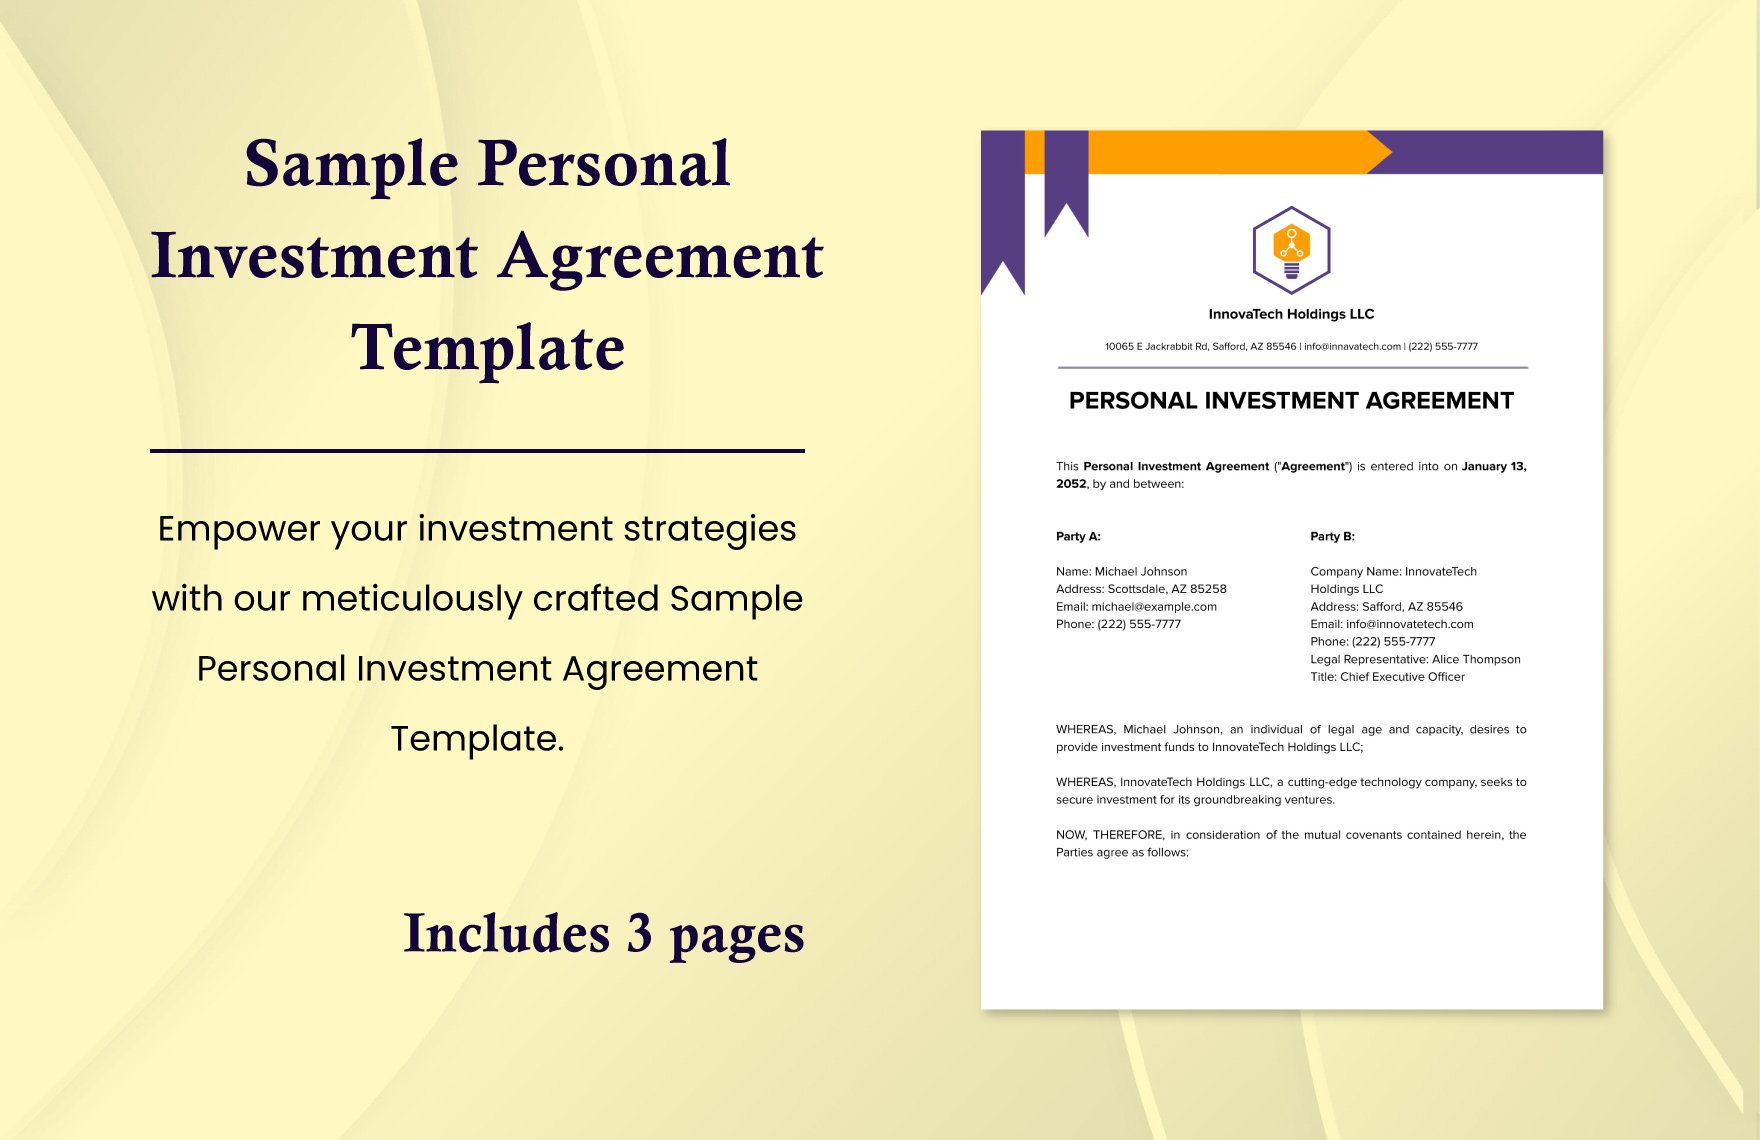 Sample Personal Investment Agreement Template